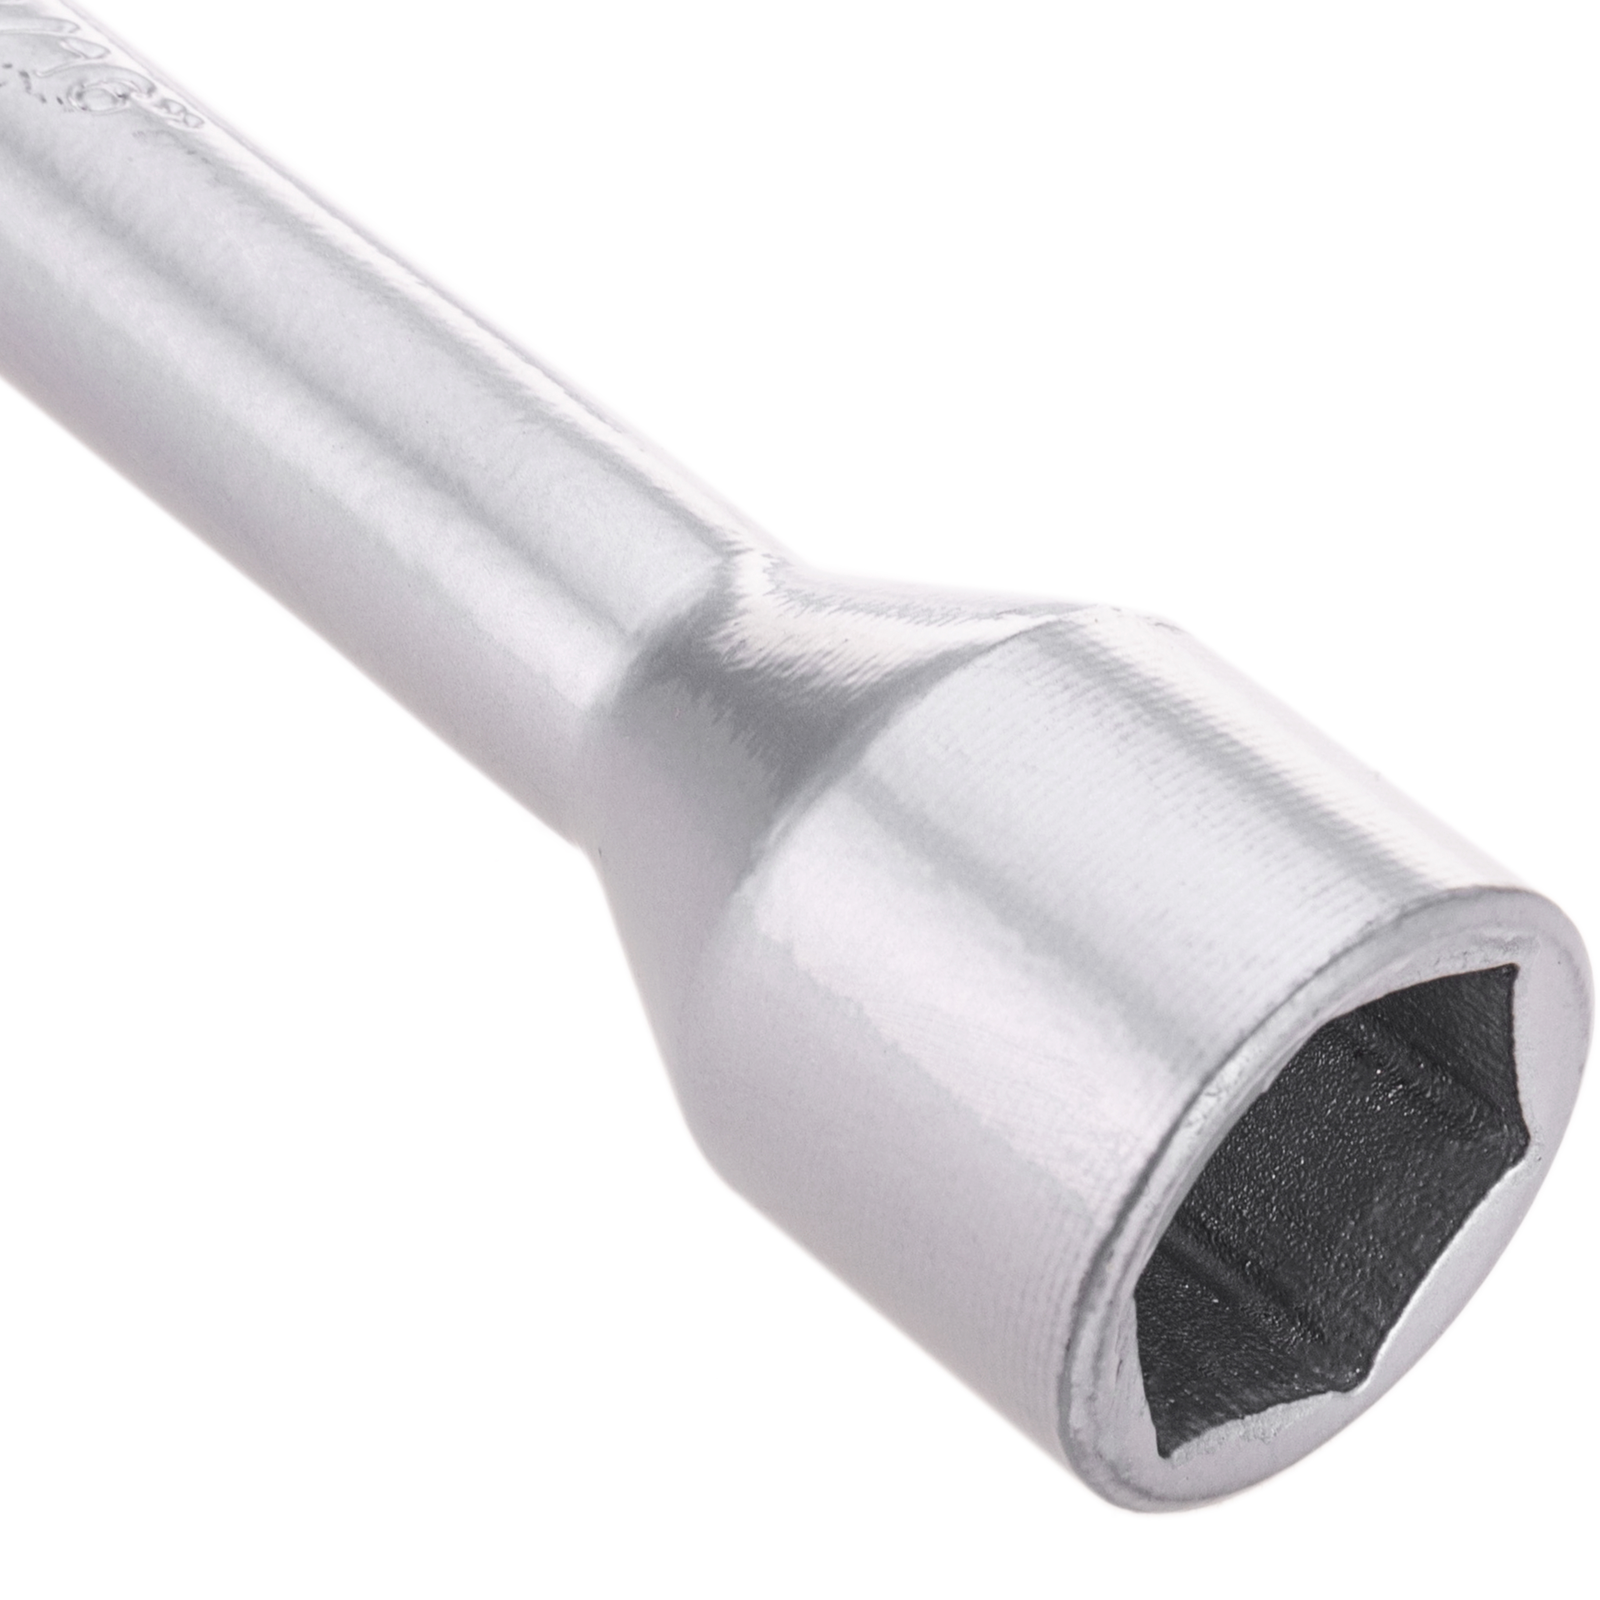 Car 4-way cross wheel wrench Cablematic